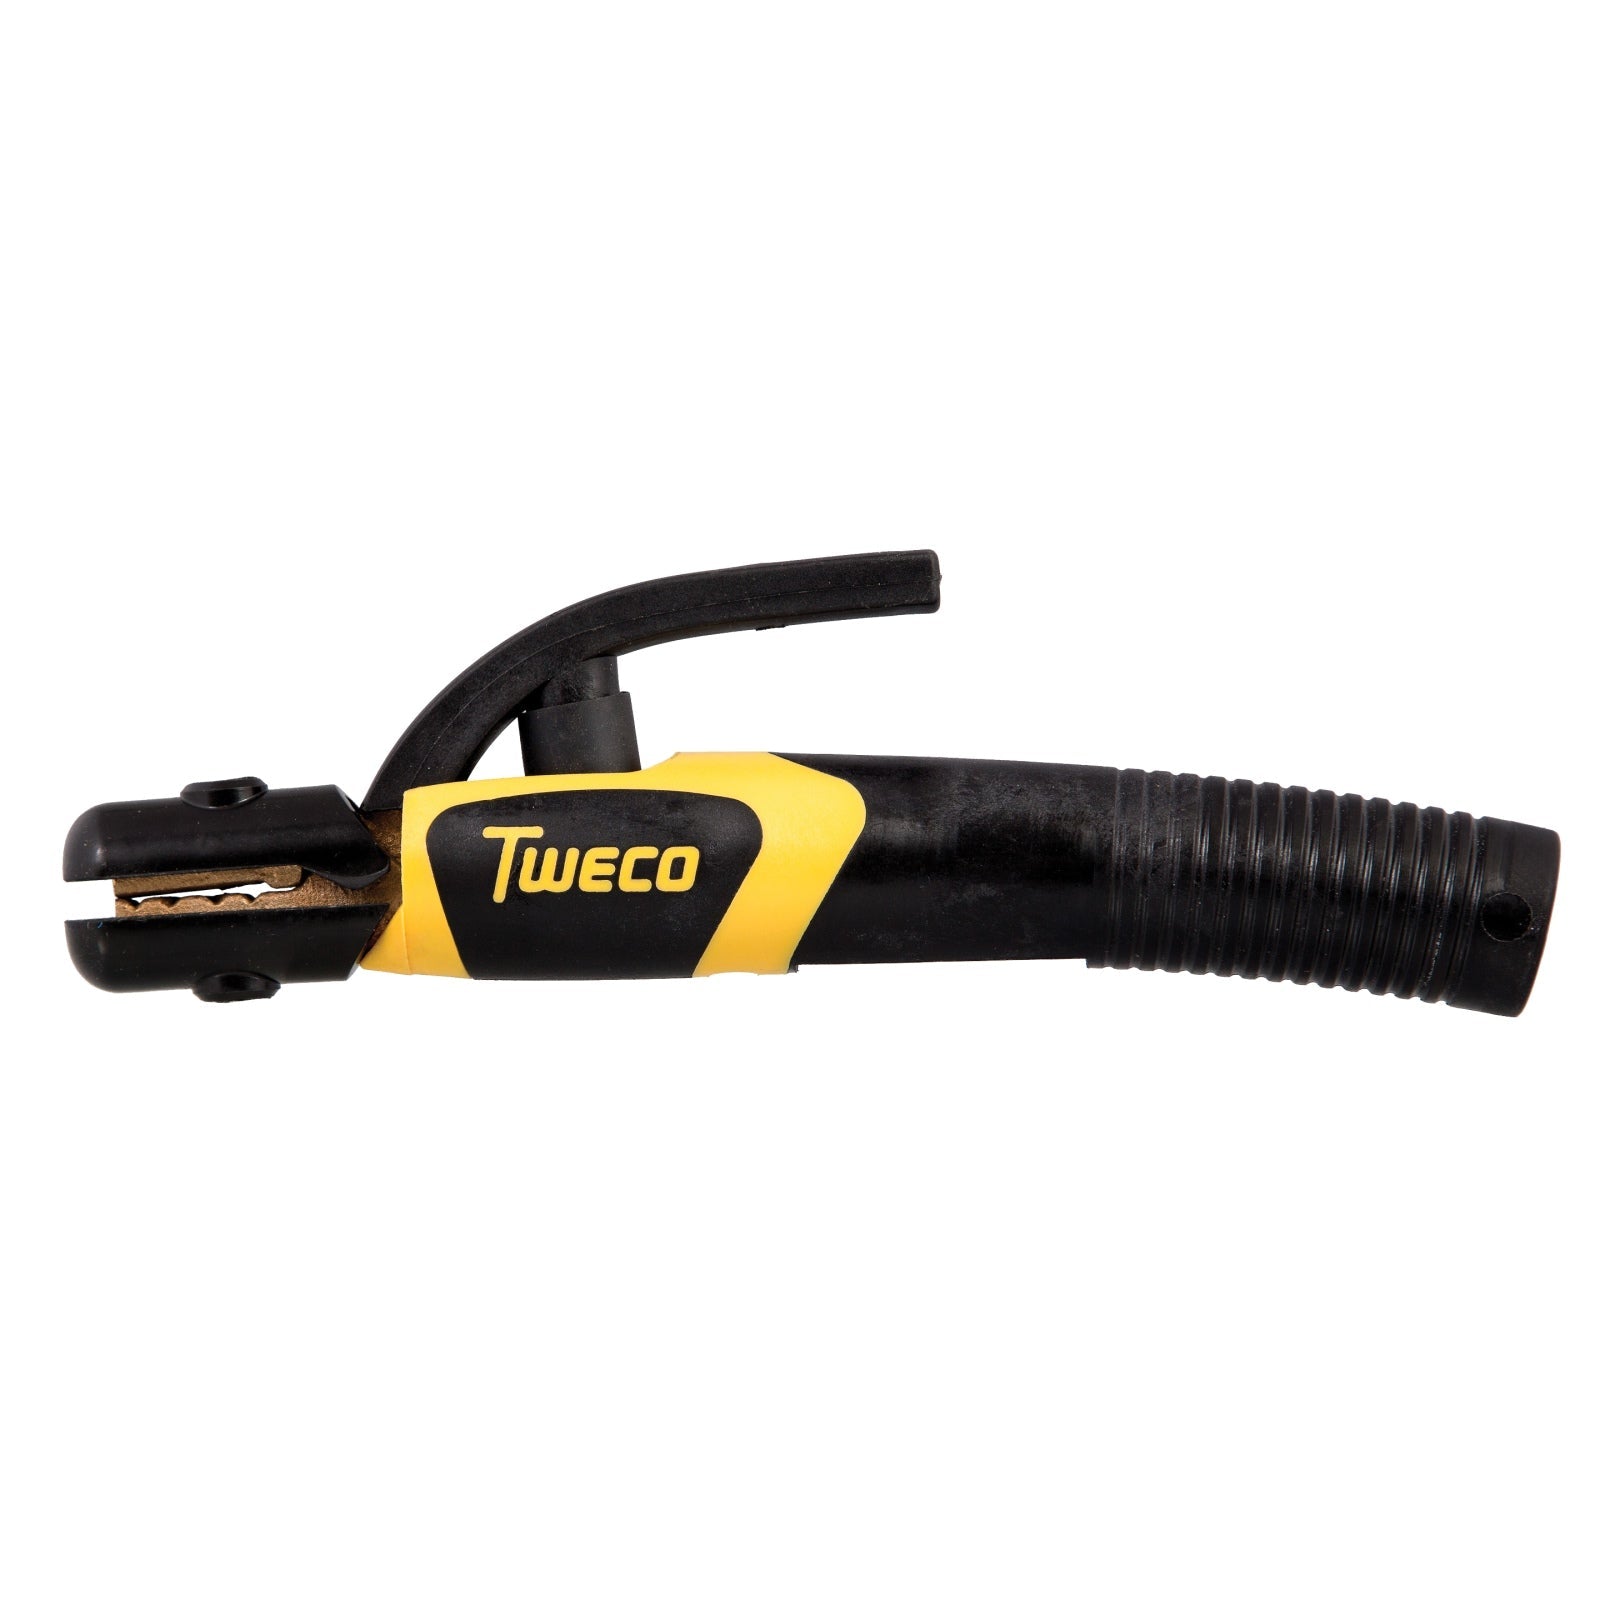 Tweco TwecoTong 200 AMP Electrode Holder (T-532)